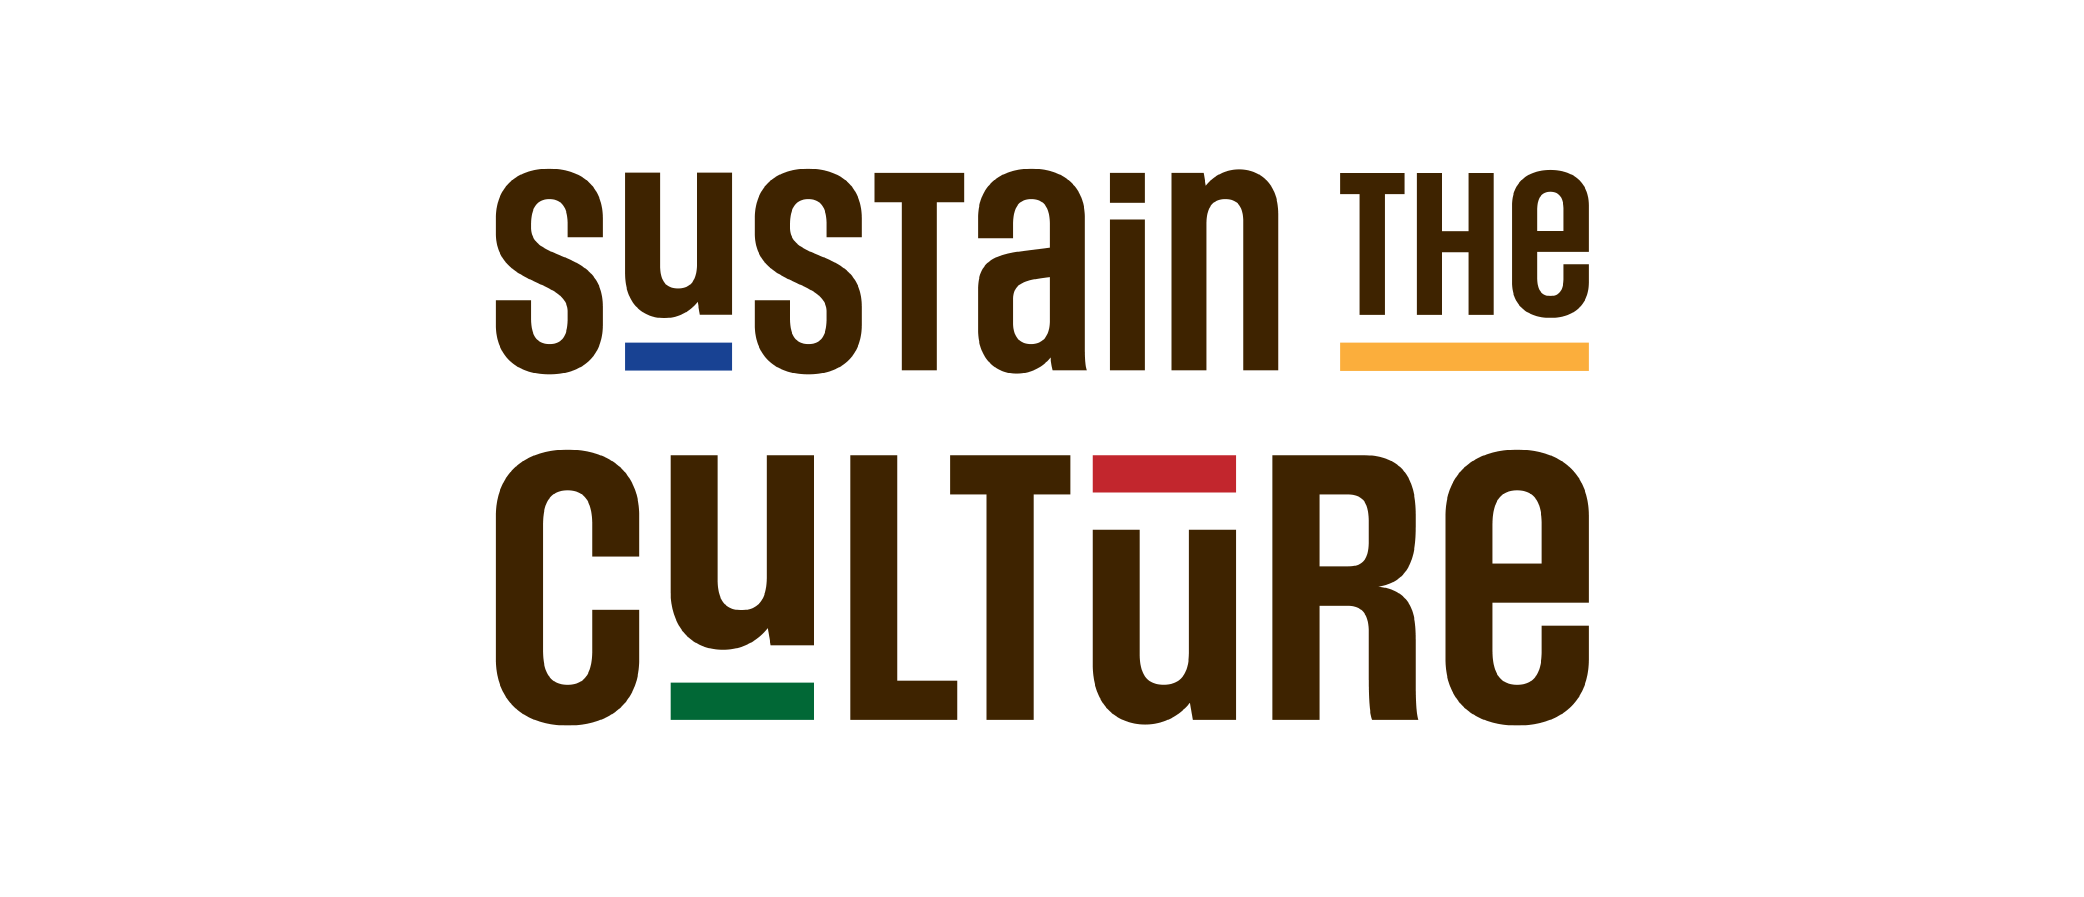 Sustain the Culture